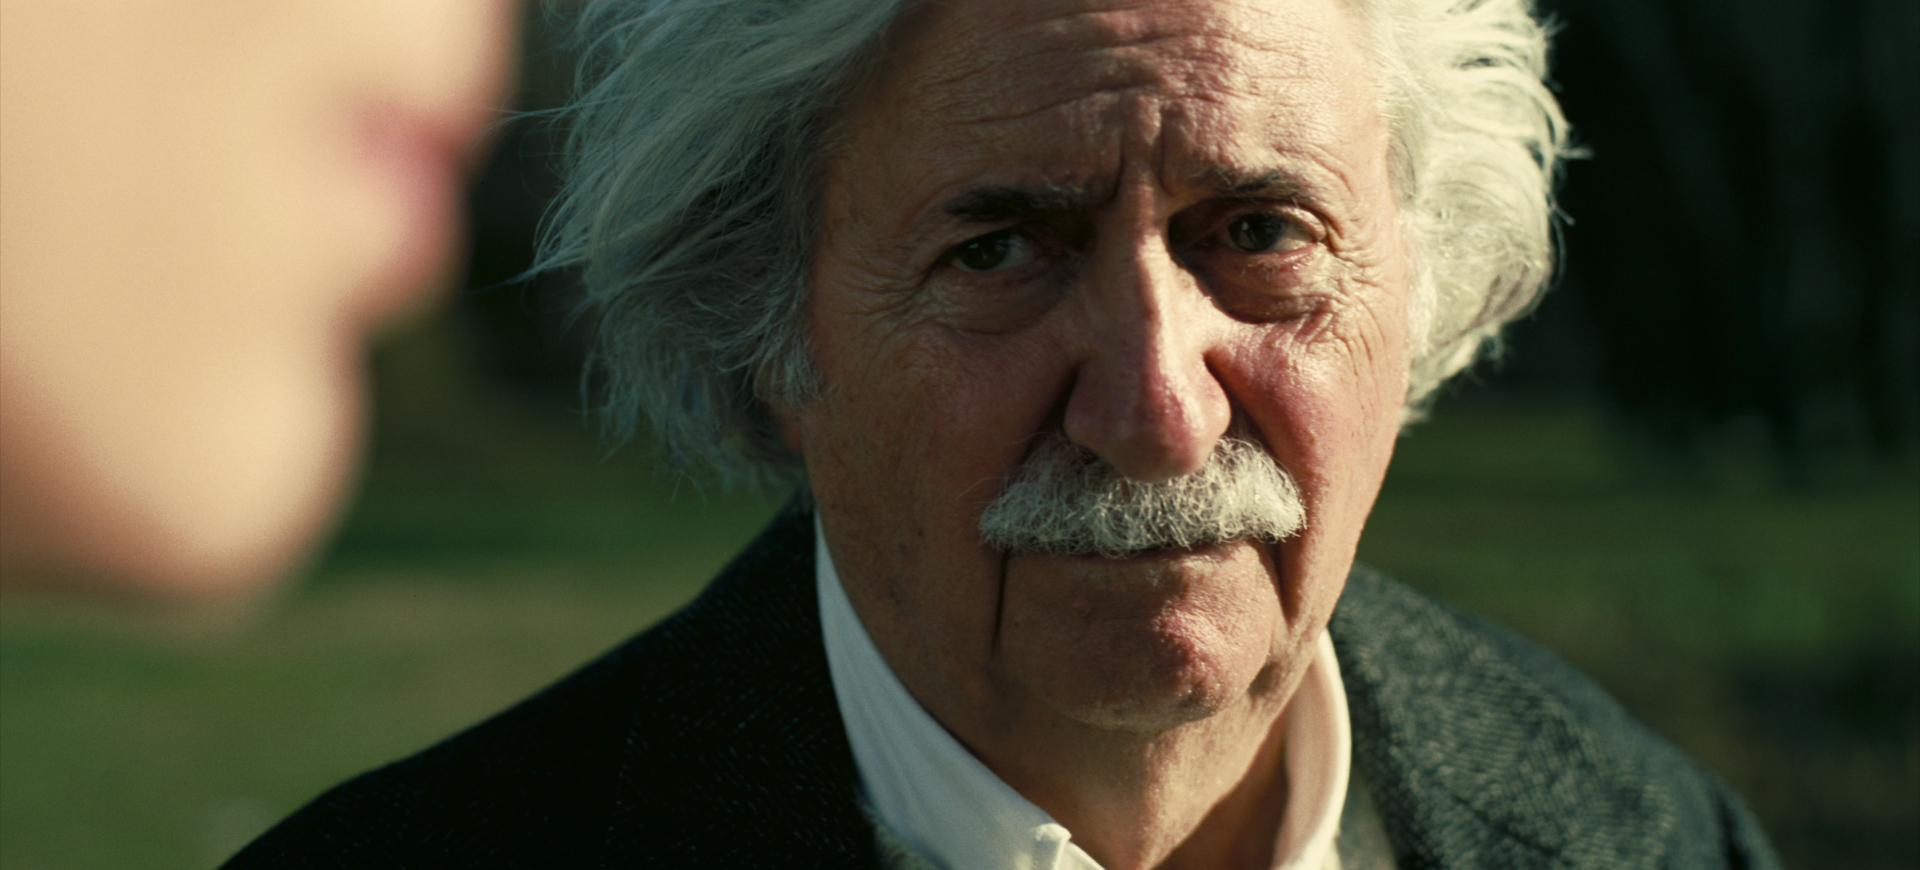 A close up of Albert Einstein, as seen in Christopher Nolan’s Oppenheimer. He is an older man with an impressive white mustache and fluffy white hair.